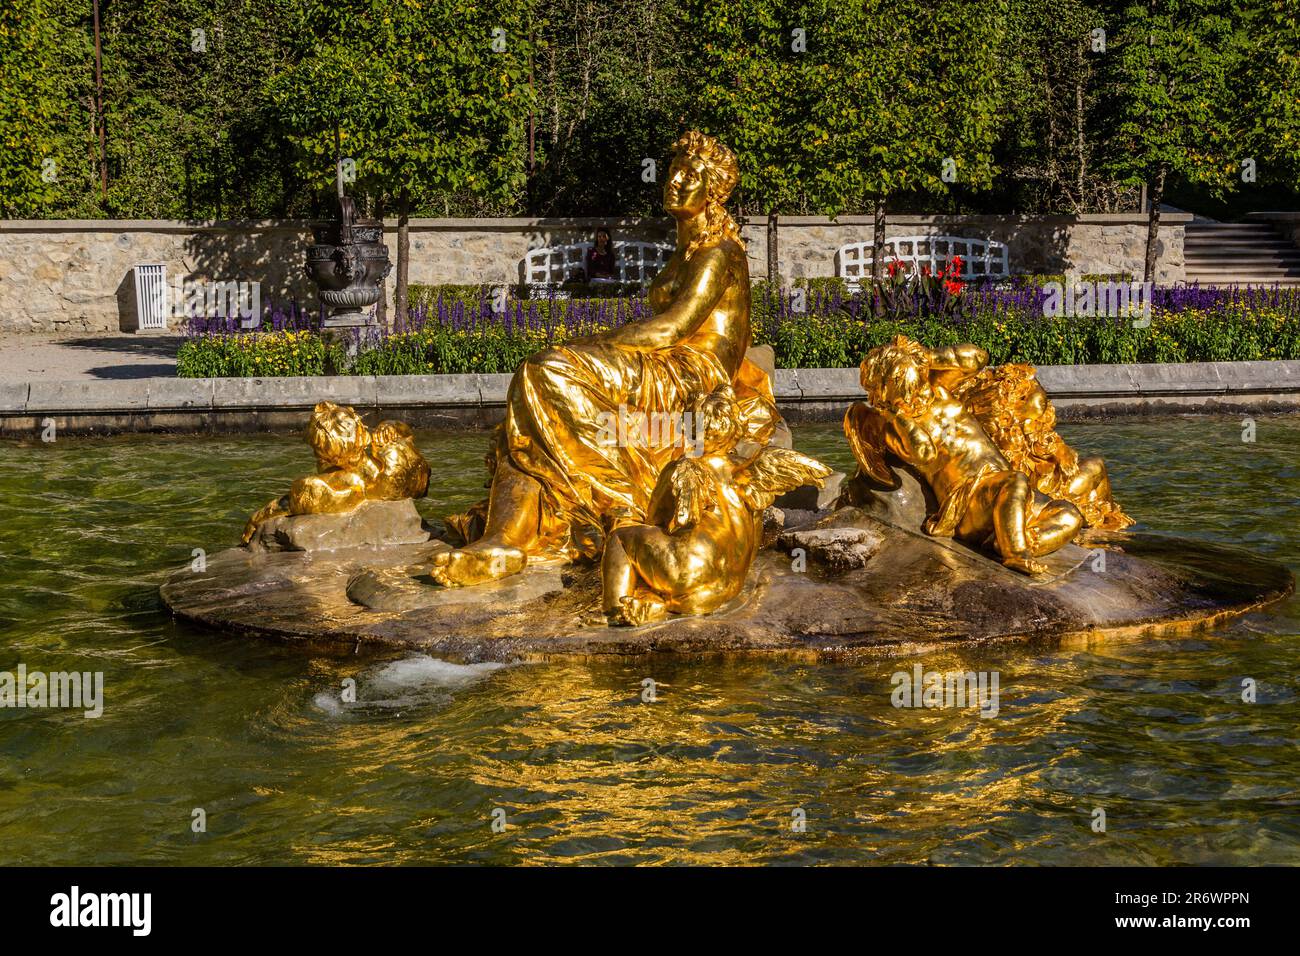 LINDERHOF, GERMANY - SEPTEMBER 4, 2019: Golden statue of goddess Flora and Puttos at the grounds of Linderhof palace, Bavaria state, Germany. Stock Photo